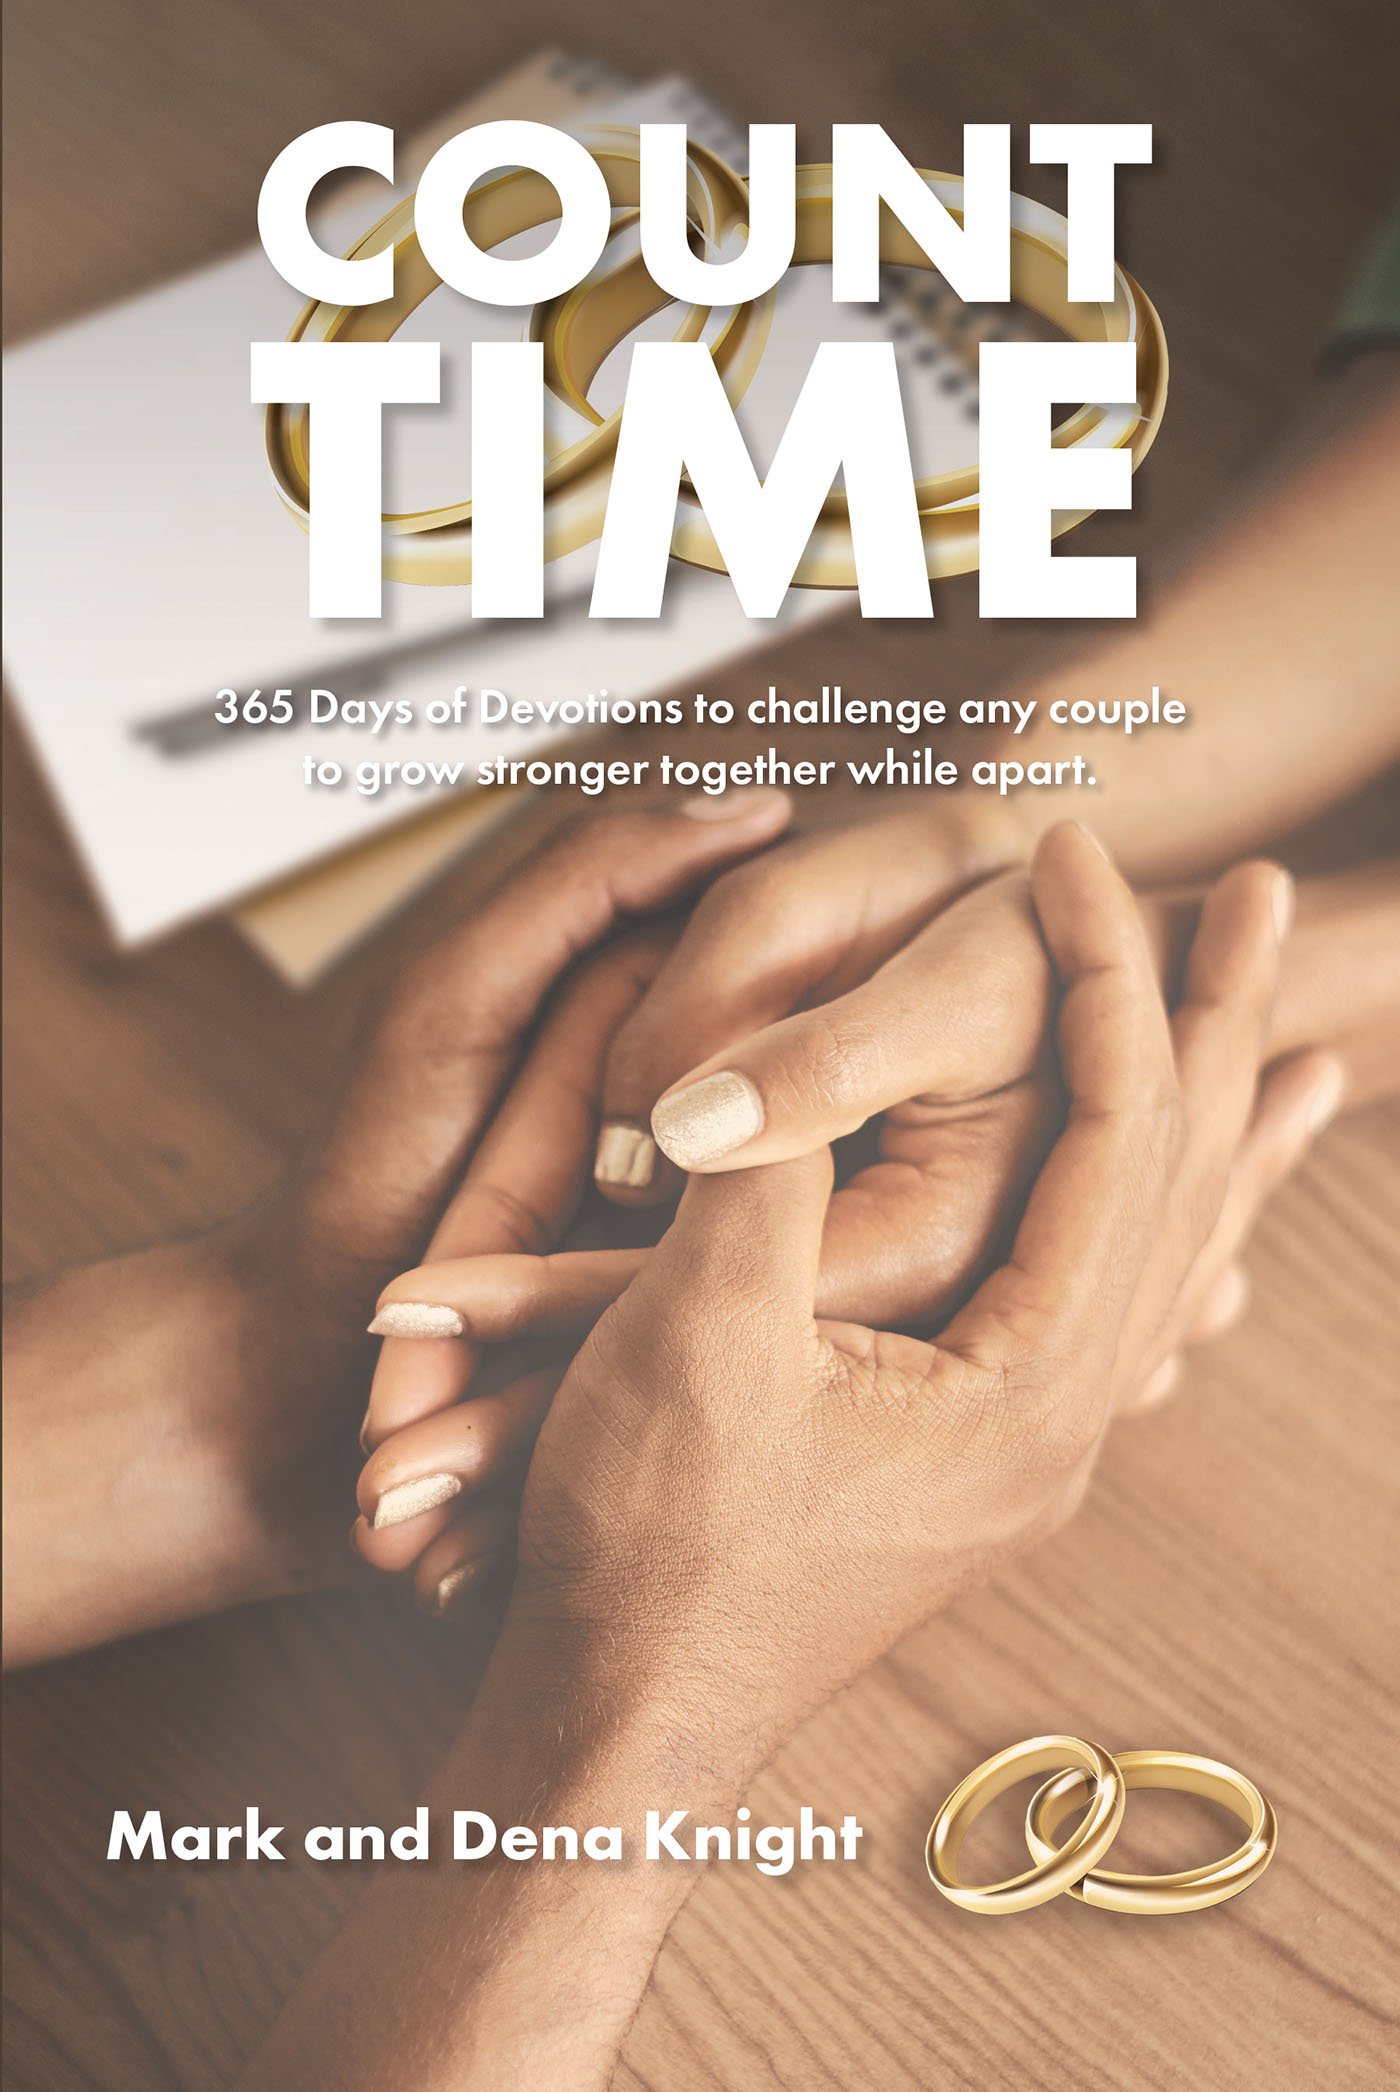 Mark and Dena Knight’s Newly Released "Count Time" is a Powerful Resource for Anyone Navigating a Complex, Long-Distance Relationship